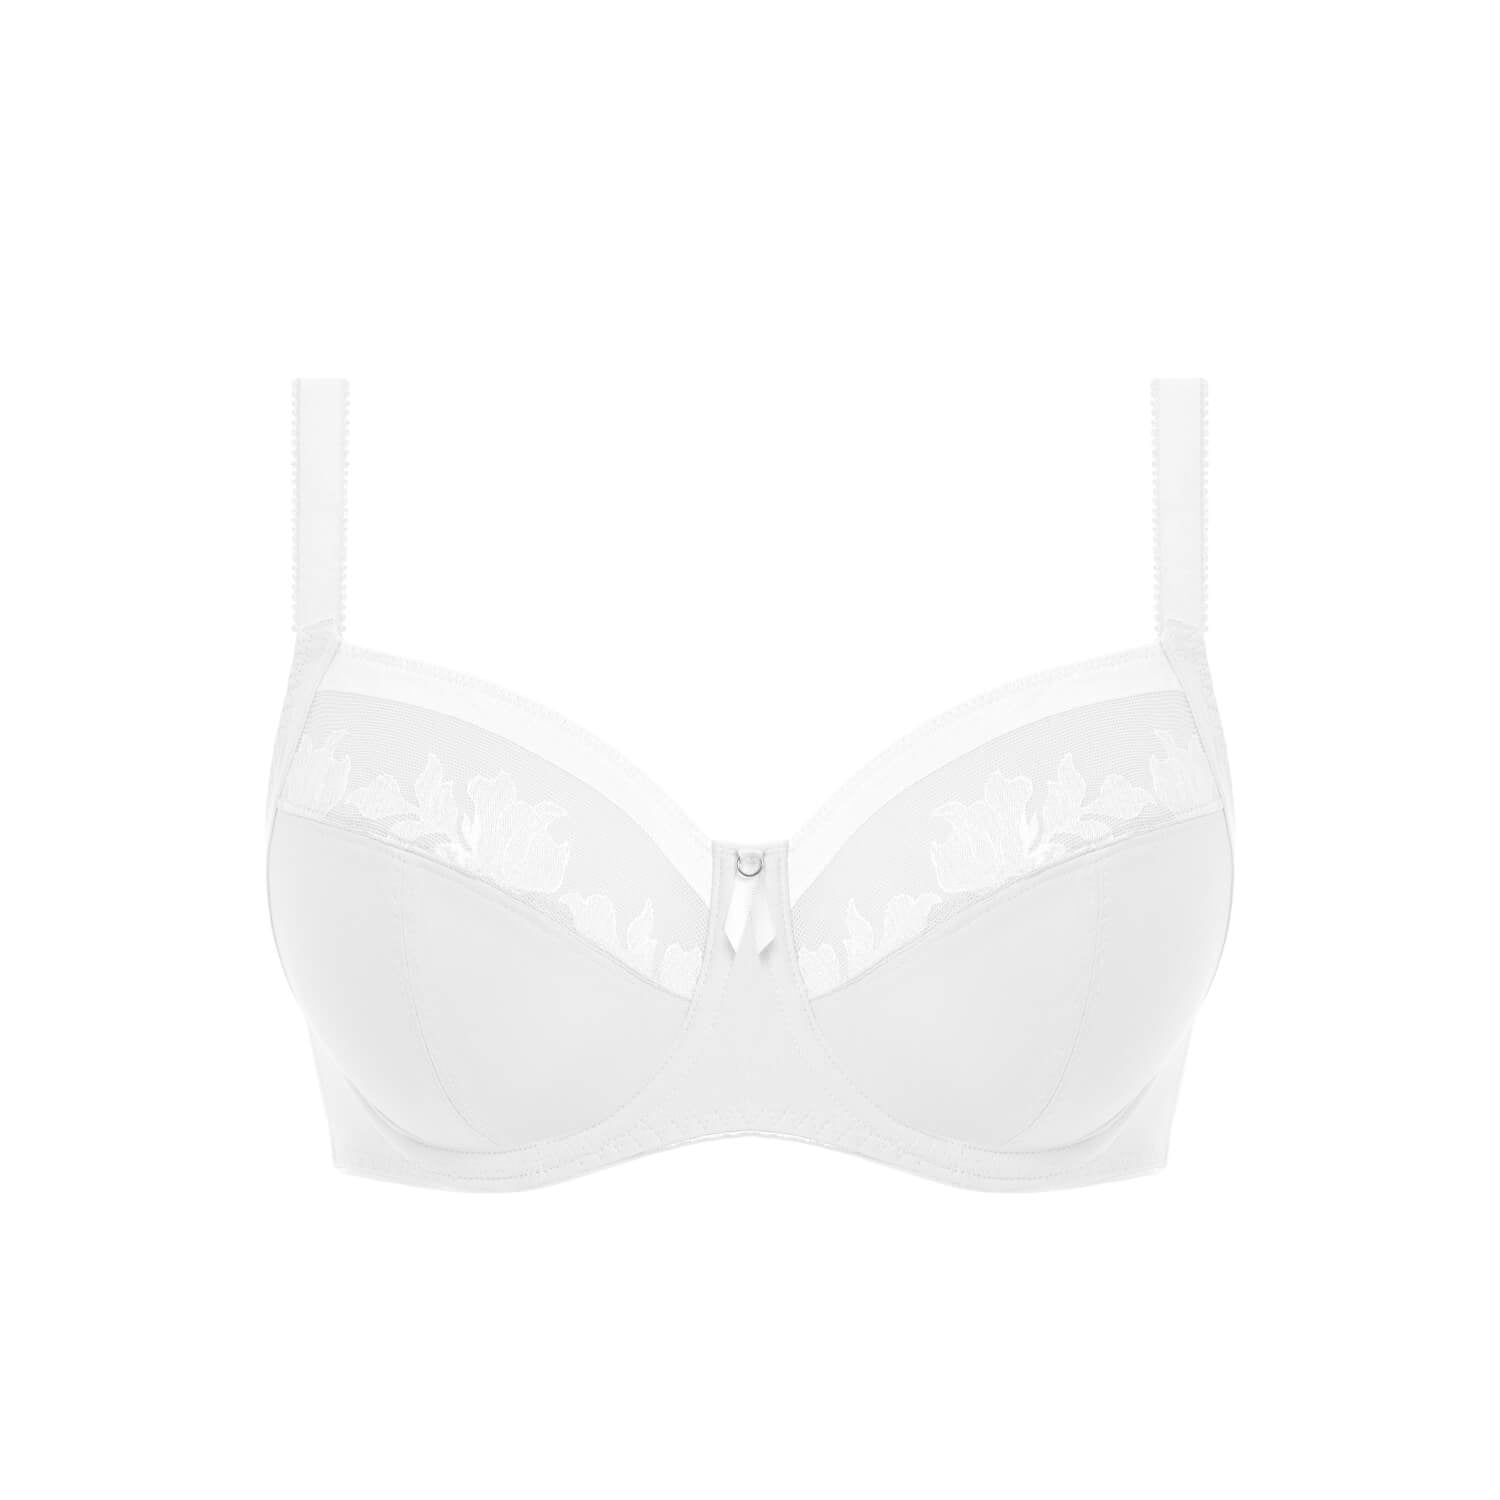 Illusion Side Support Bra - Nude